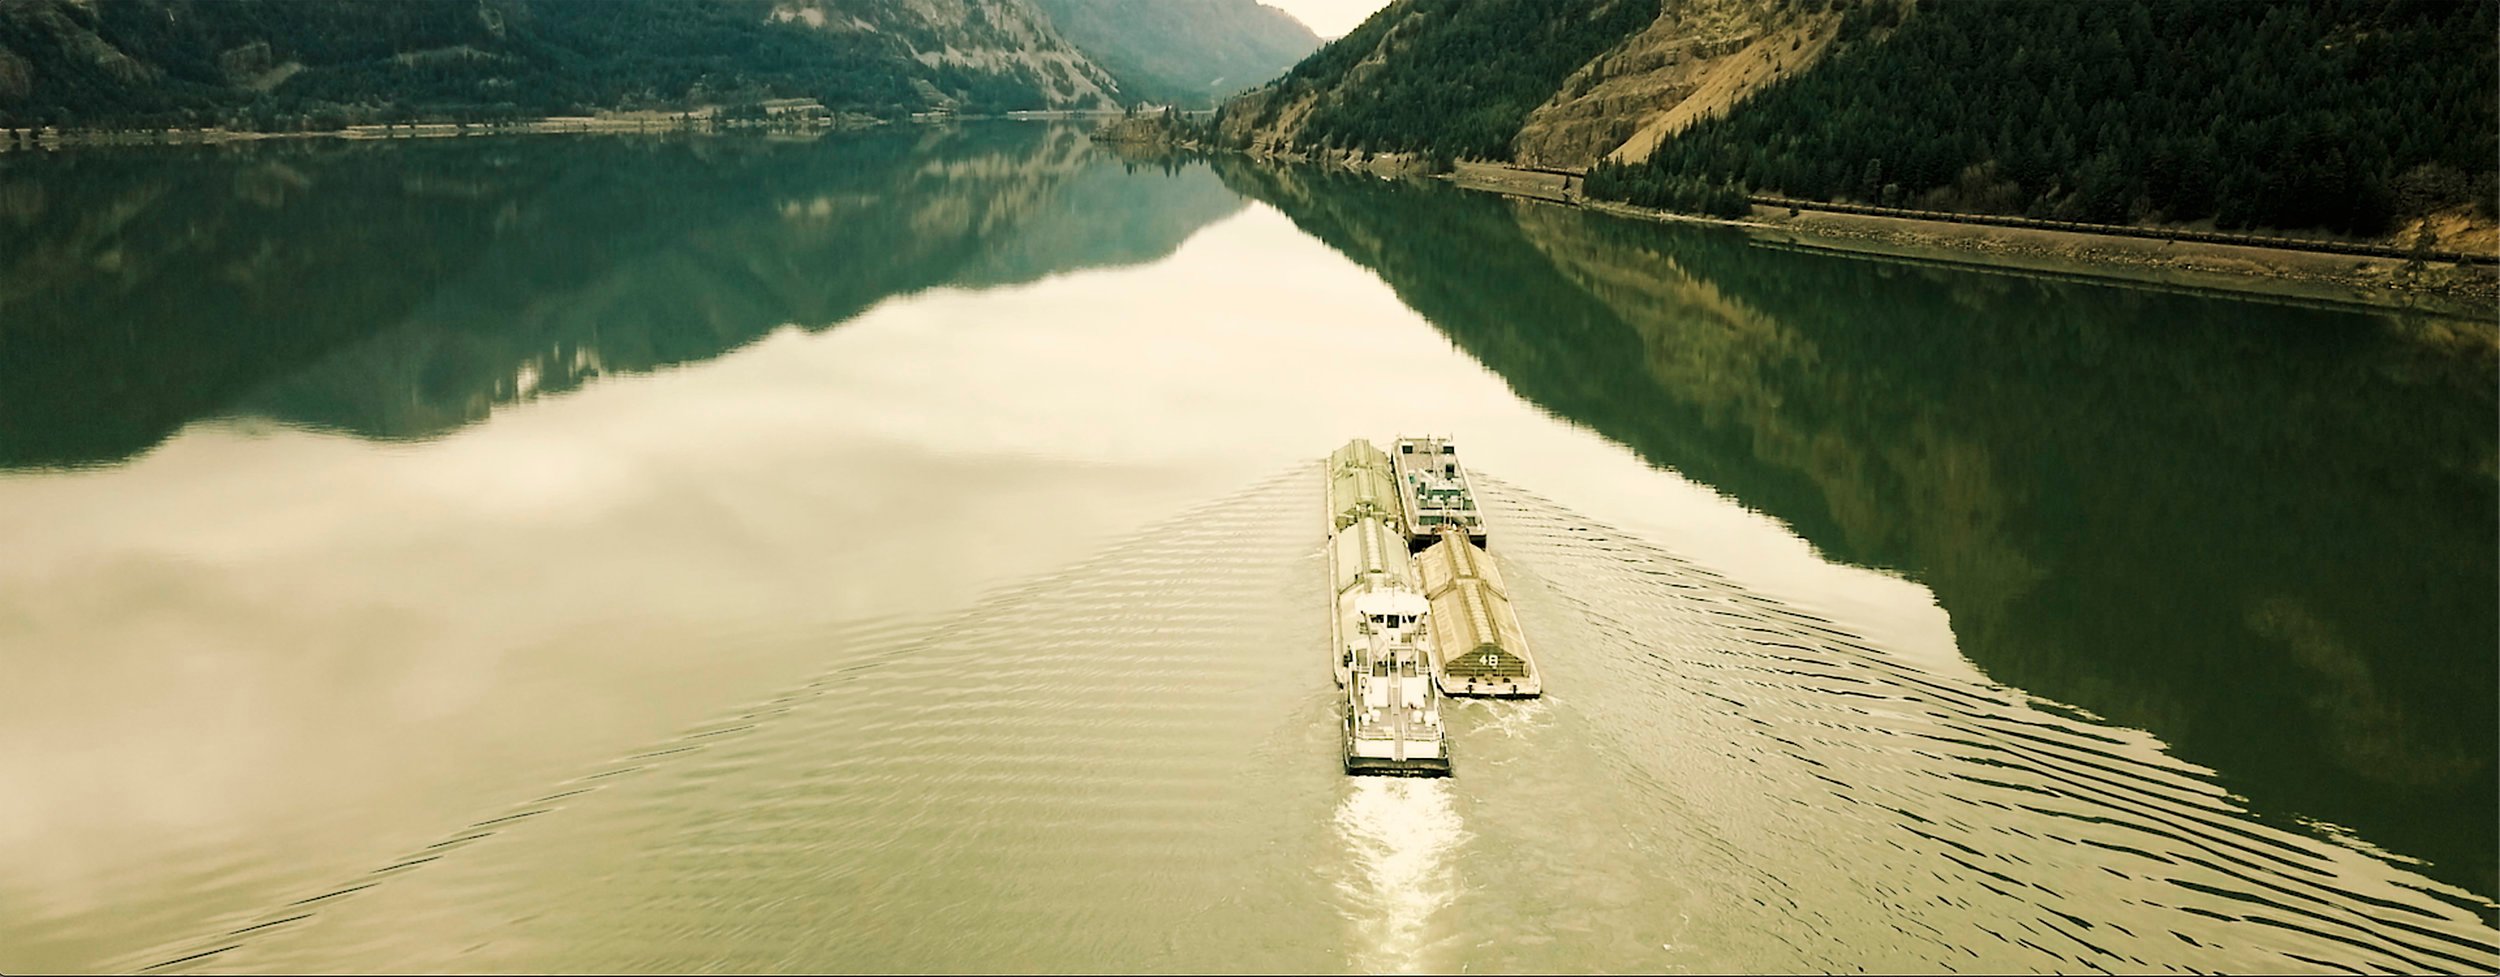 Drone photo of boats in the Columbia Gorge by Steve Utaski.